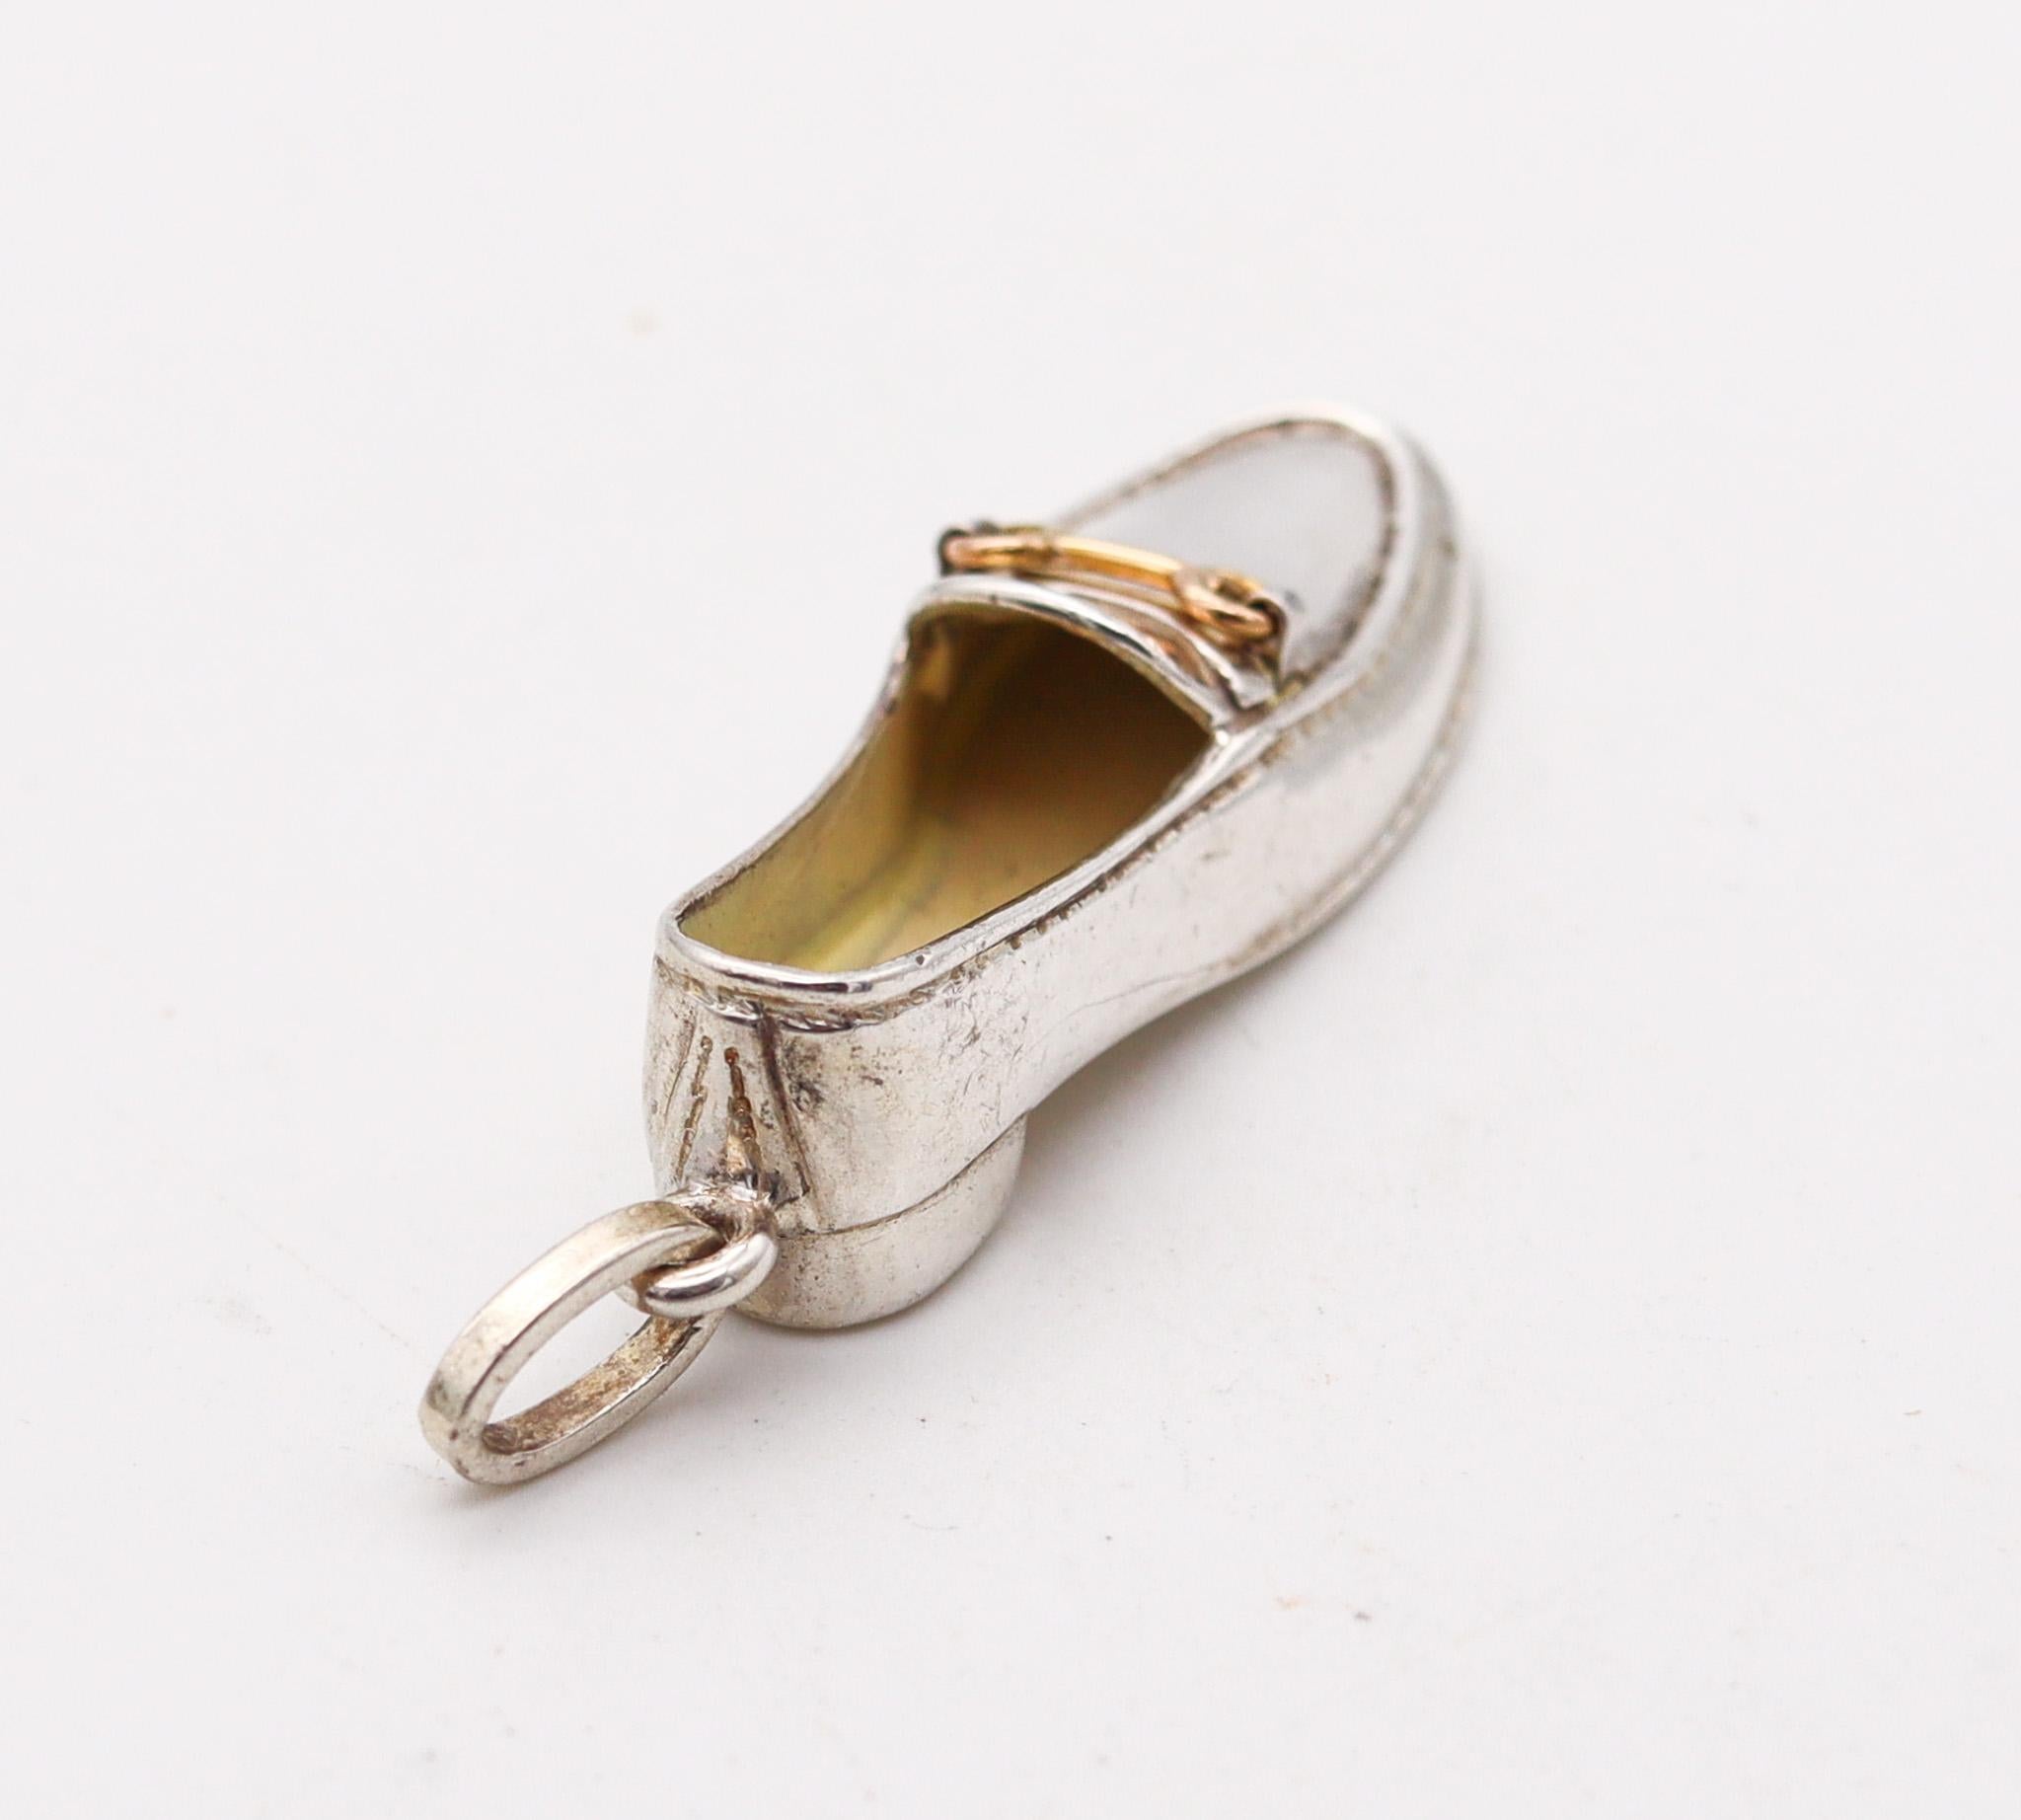 Gucci 1980 Firenze Loafer Shoe Pendant Charm Solid .925 Sterling & 18Kt Gold In Excellent Condition For Sale In Miami, FL